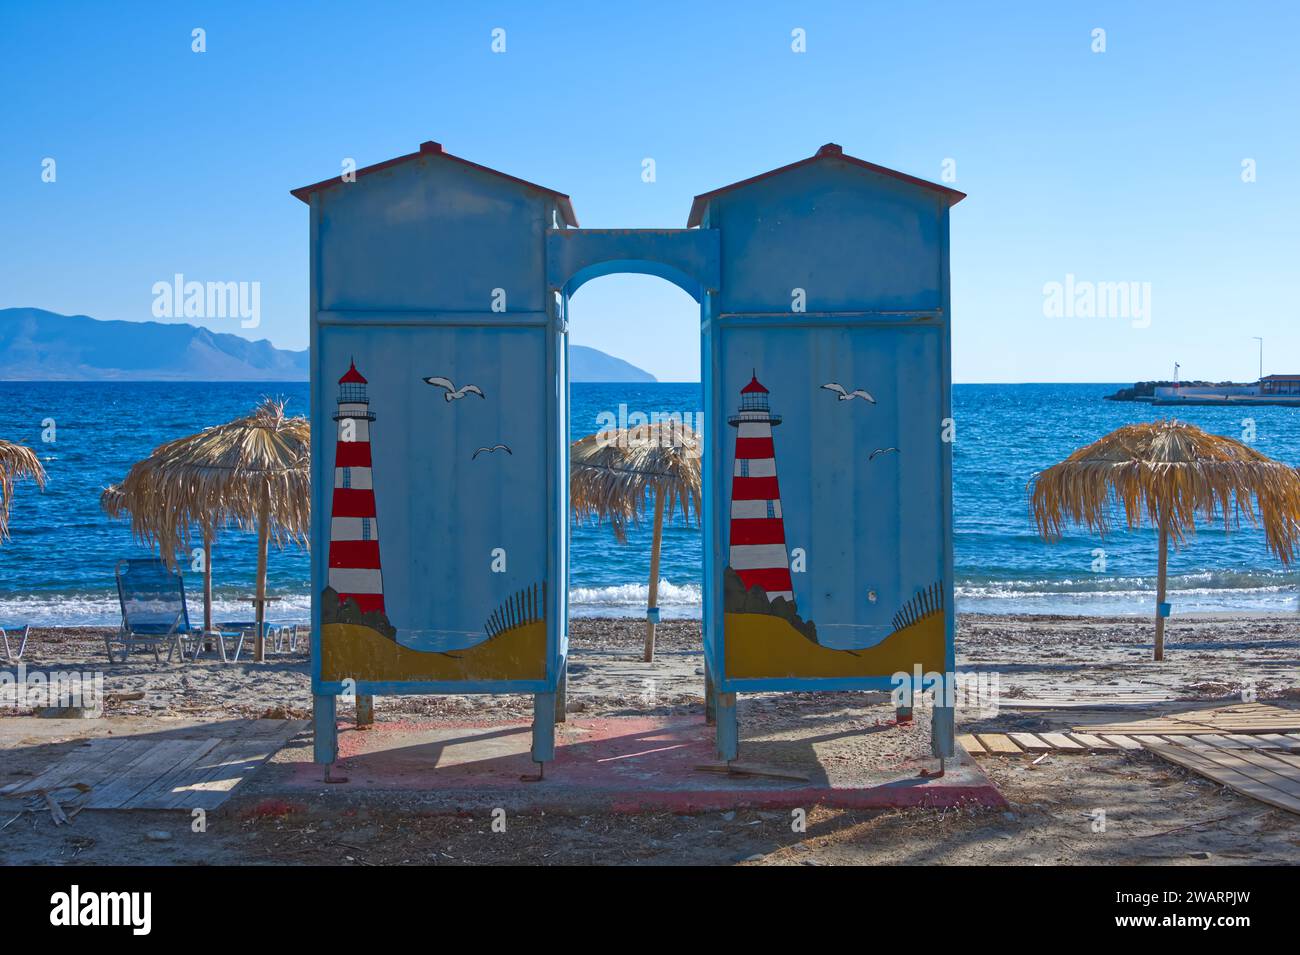 Decorated changing cubicle, sunbeds and parasols on the beach on a greek island Stock Photo